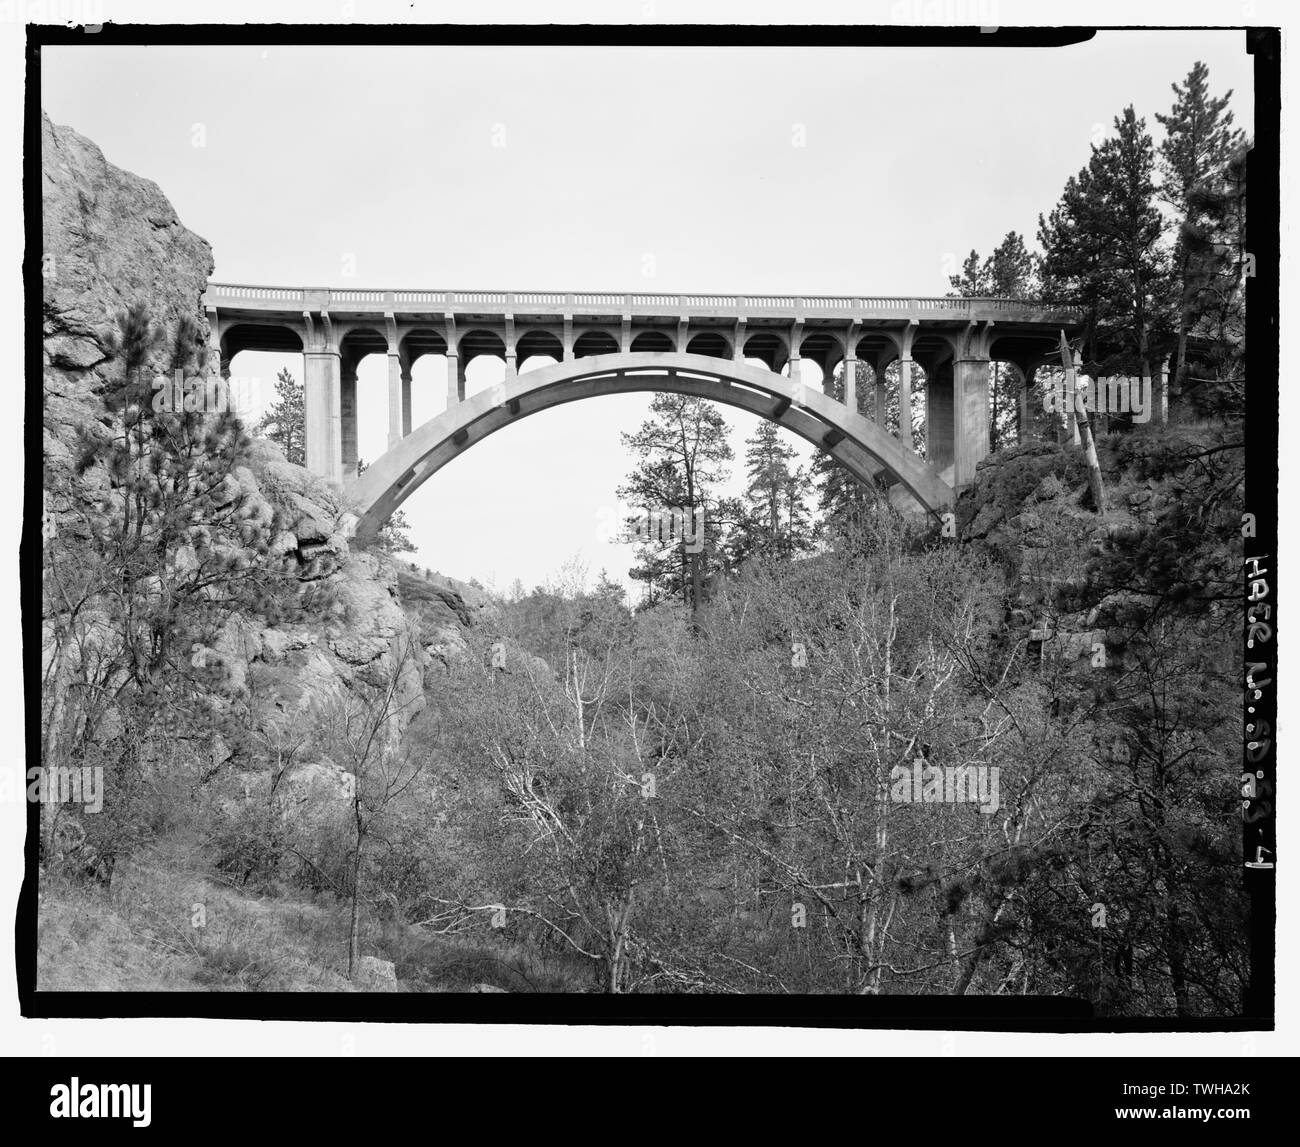 Route 87, Beaver Creek Bridge, elevation. View ESE. - Beaver Creek Bridge, Hot Springs, Fall River County, SD; Hamilton, J Harper; Northwestern Engineering Company; Adelstein, Morris E; Linder, Jack A; Gray, Chris, field team project manager; Magdalenos, Christine, landscape architect; Marston, Christopher, project manager; Christianson, Justine, transmitter; Davis, Tim, historian; Delyea, Todd, delineator; Grinstead, Tim, delineator; Heckaman, Stacey, delineator; Michel, Roger, delineator; Tichi, Claire, historian; Haas, David, photographer Stock Photo